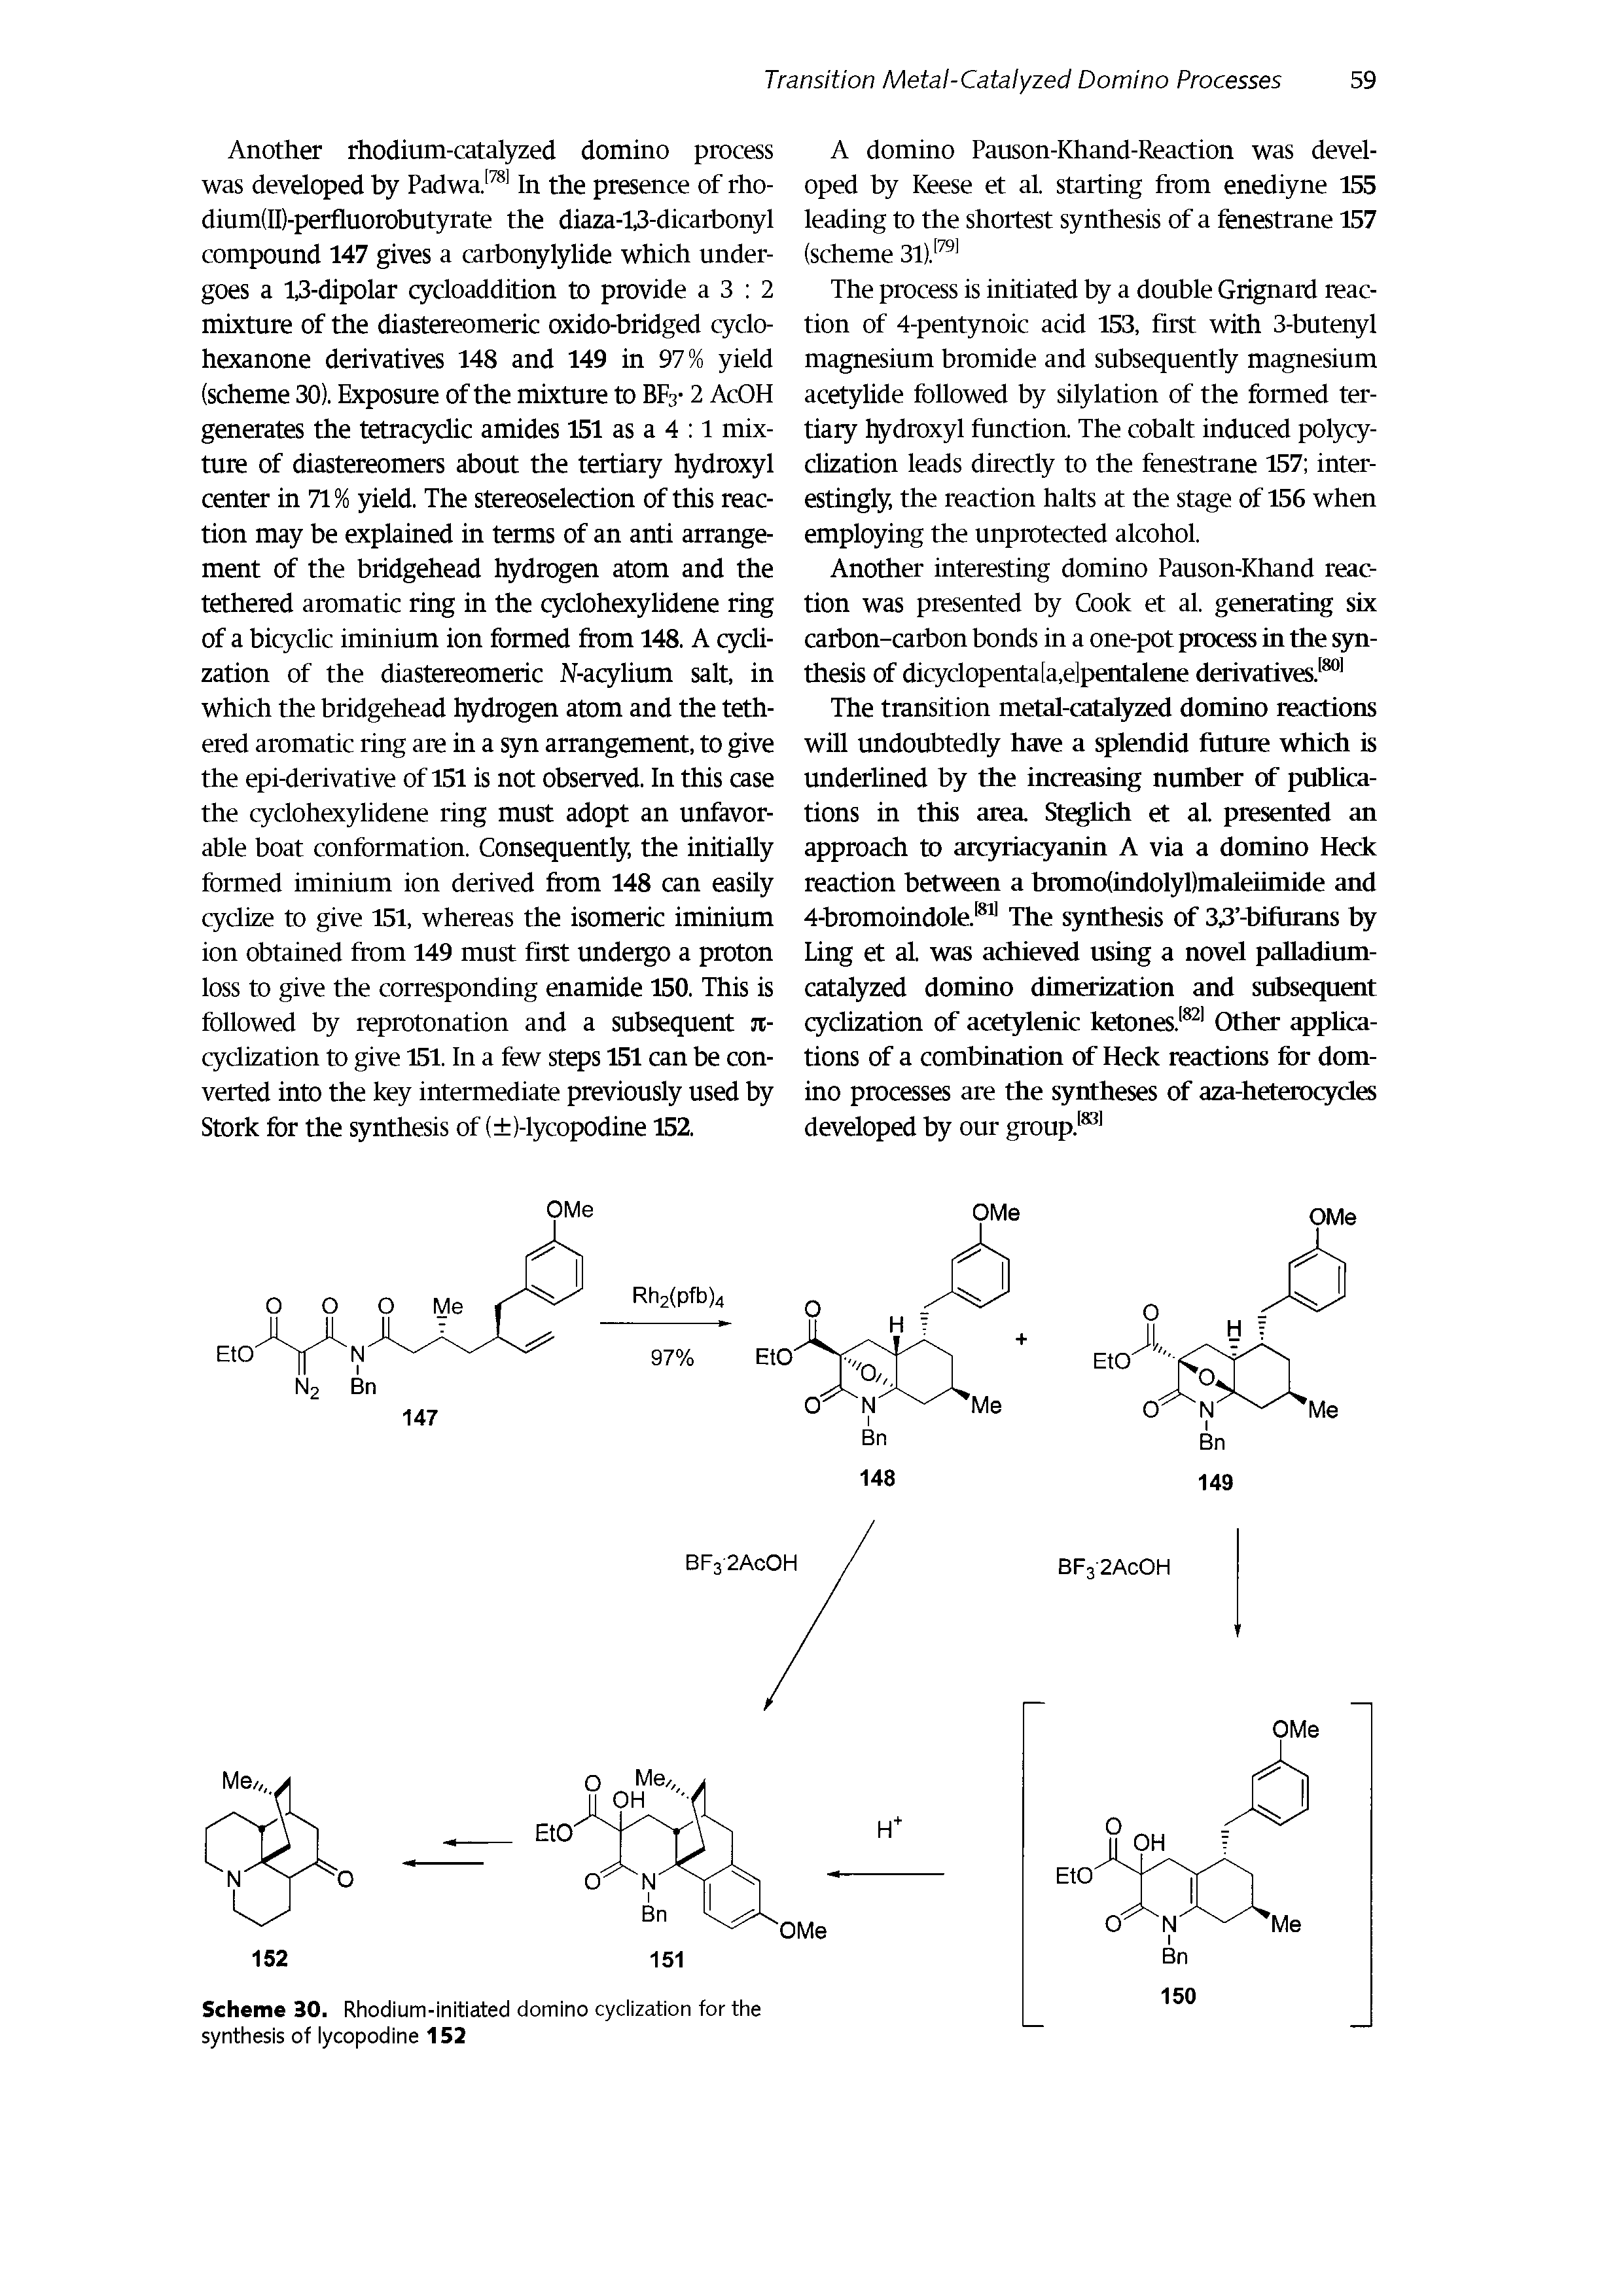 Scheme 30. Rhodium-initiated domino cyclization for the synthesis of lycopodine 152...